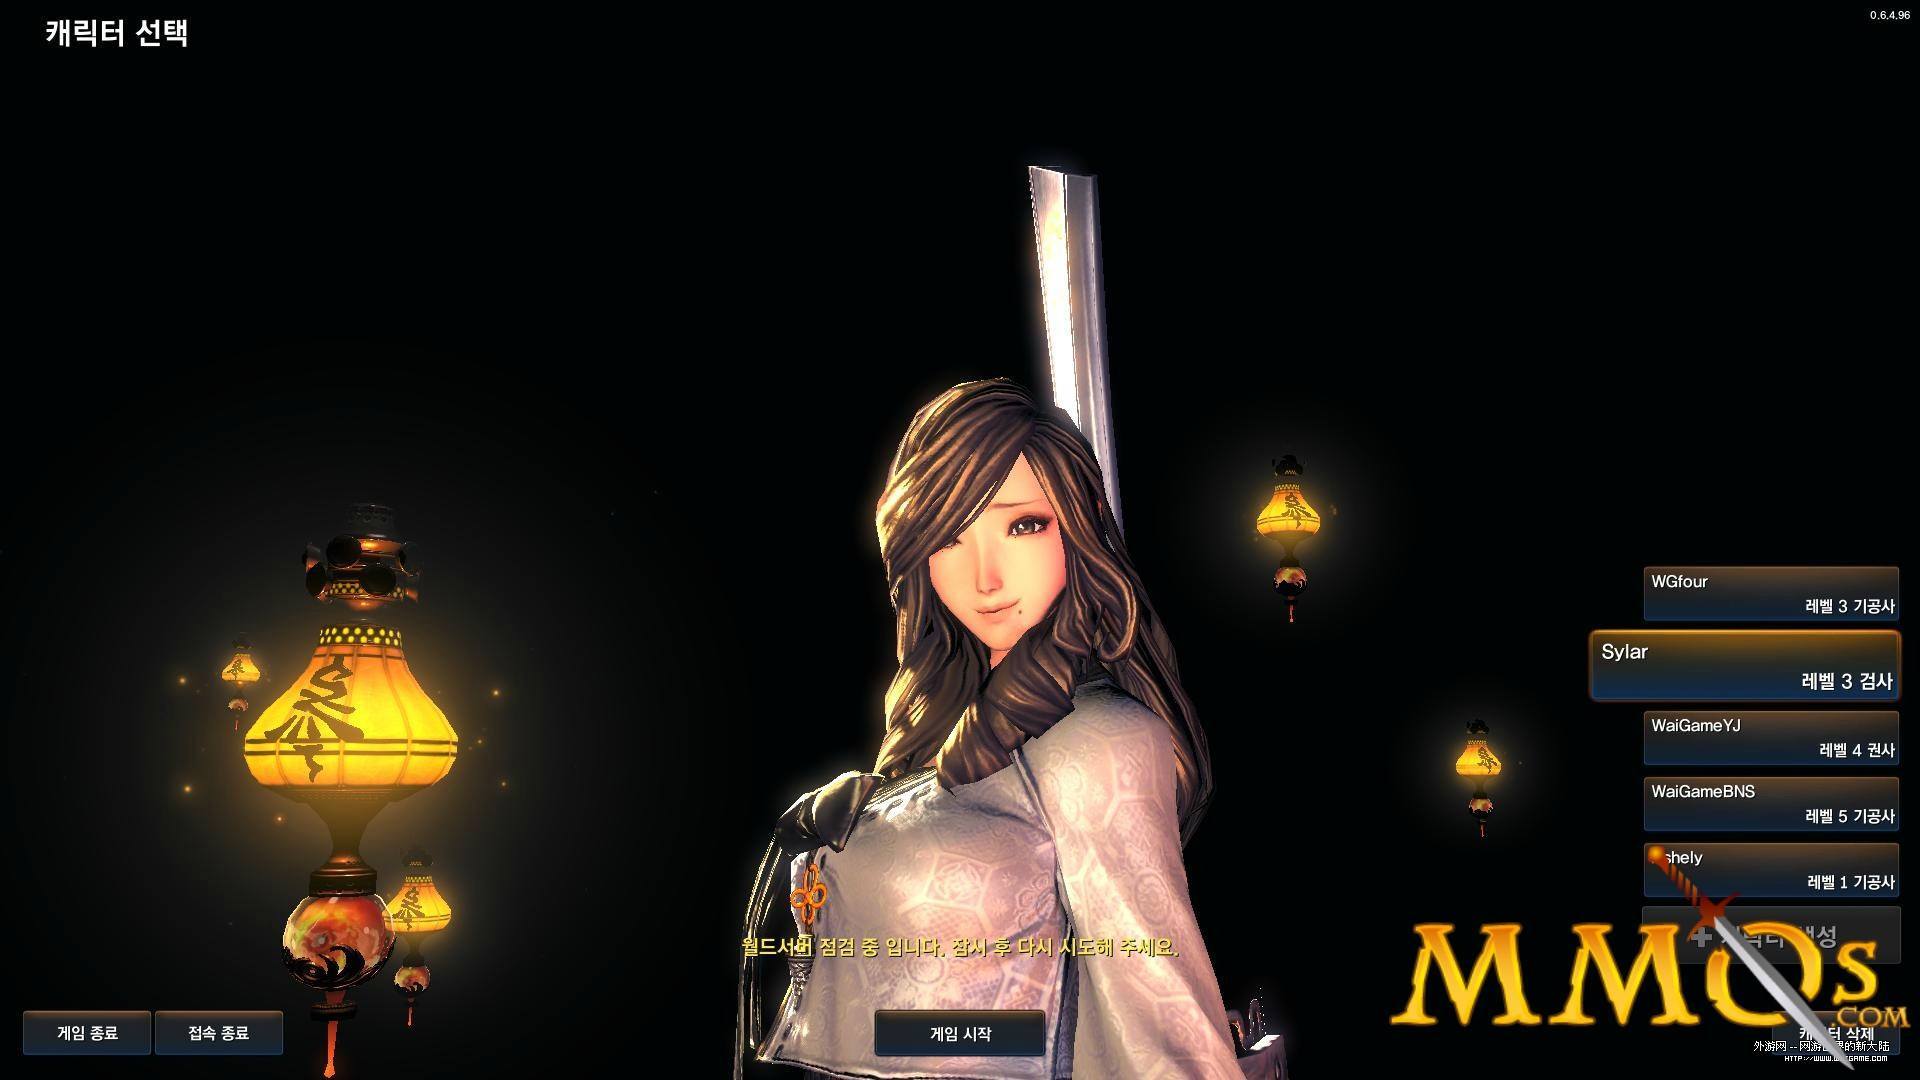 blade and soul 2